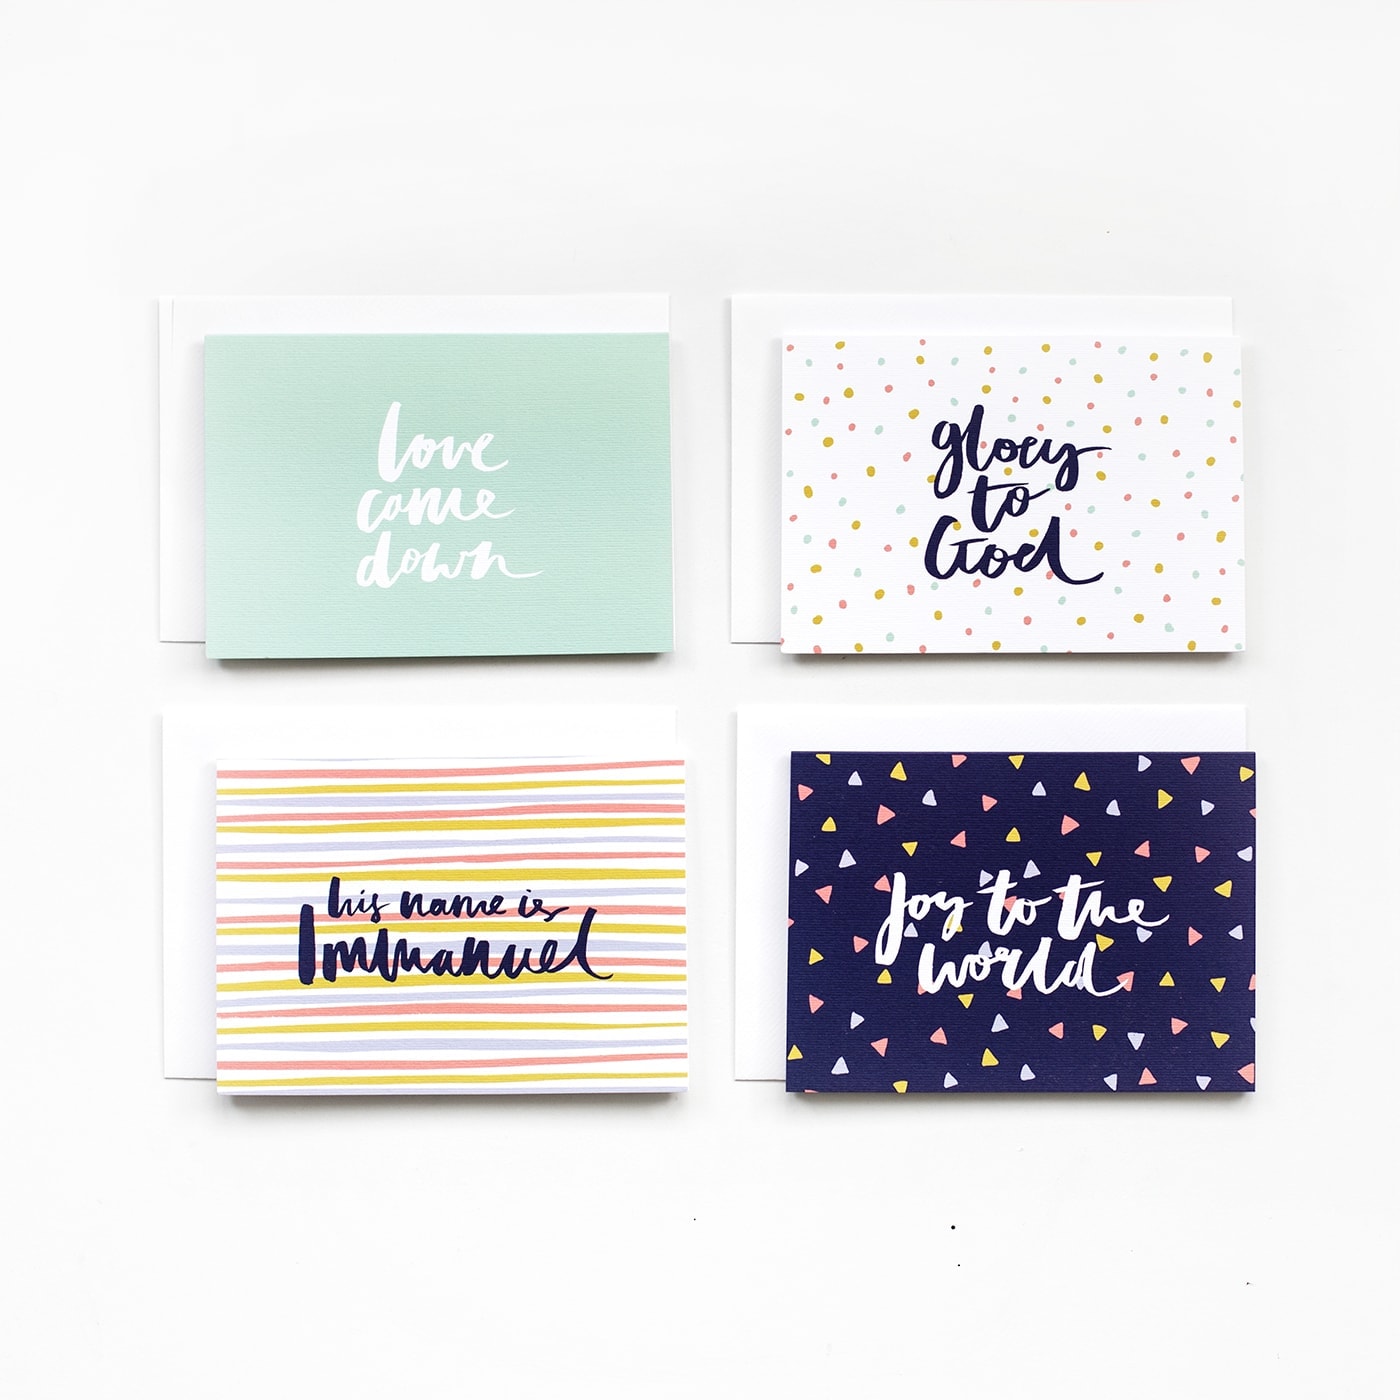 christian-christmas-cards-complete-with-bible-verse-on-the-back